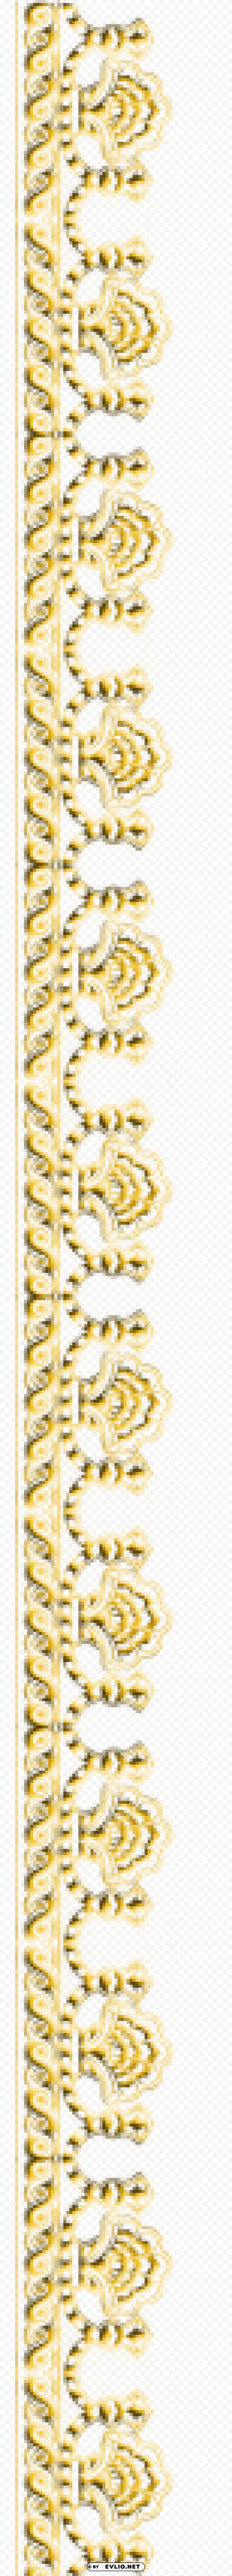 Pharaonic decorative Isolated Artwork in HighResolution Transparent PNG